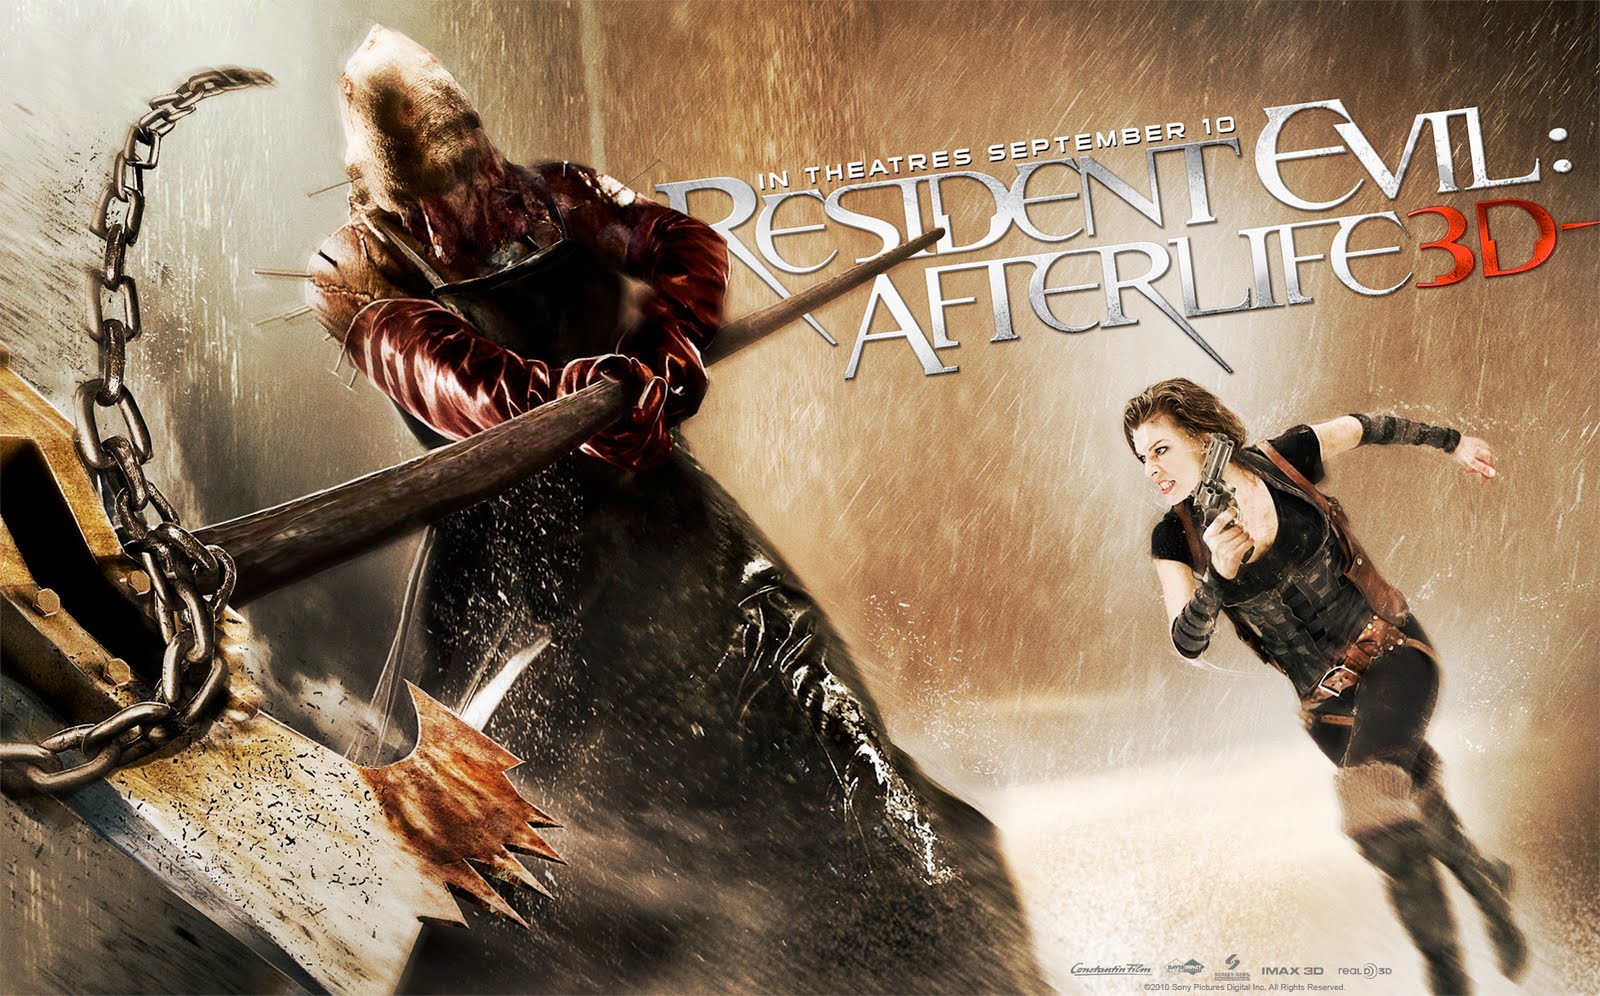 [Review] Alice Resident Evil AfterLife 3D Hot Toys - by manowash RE4+Movie+Alice